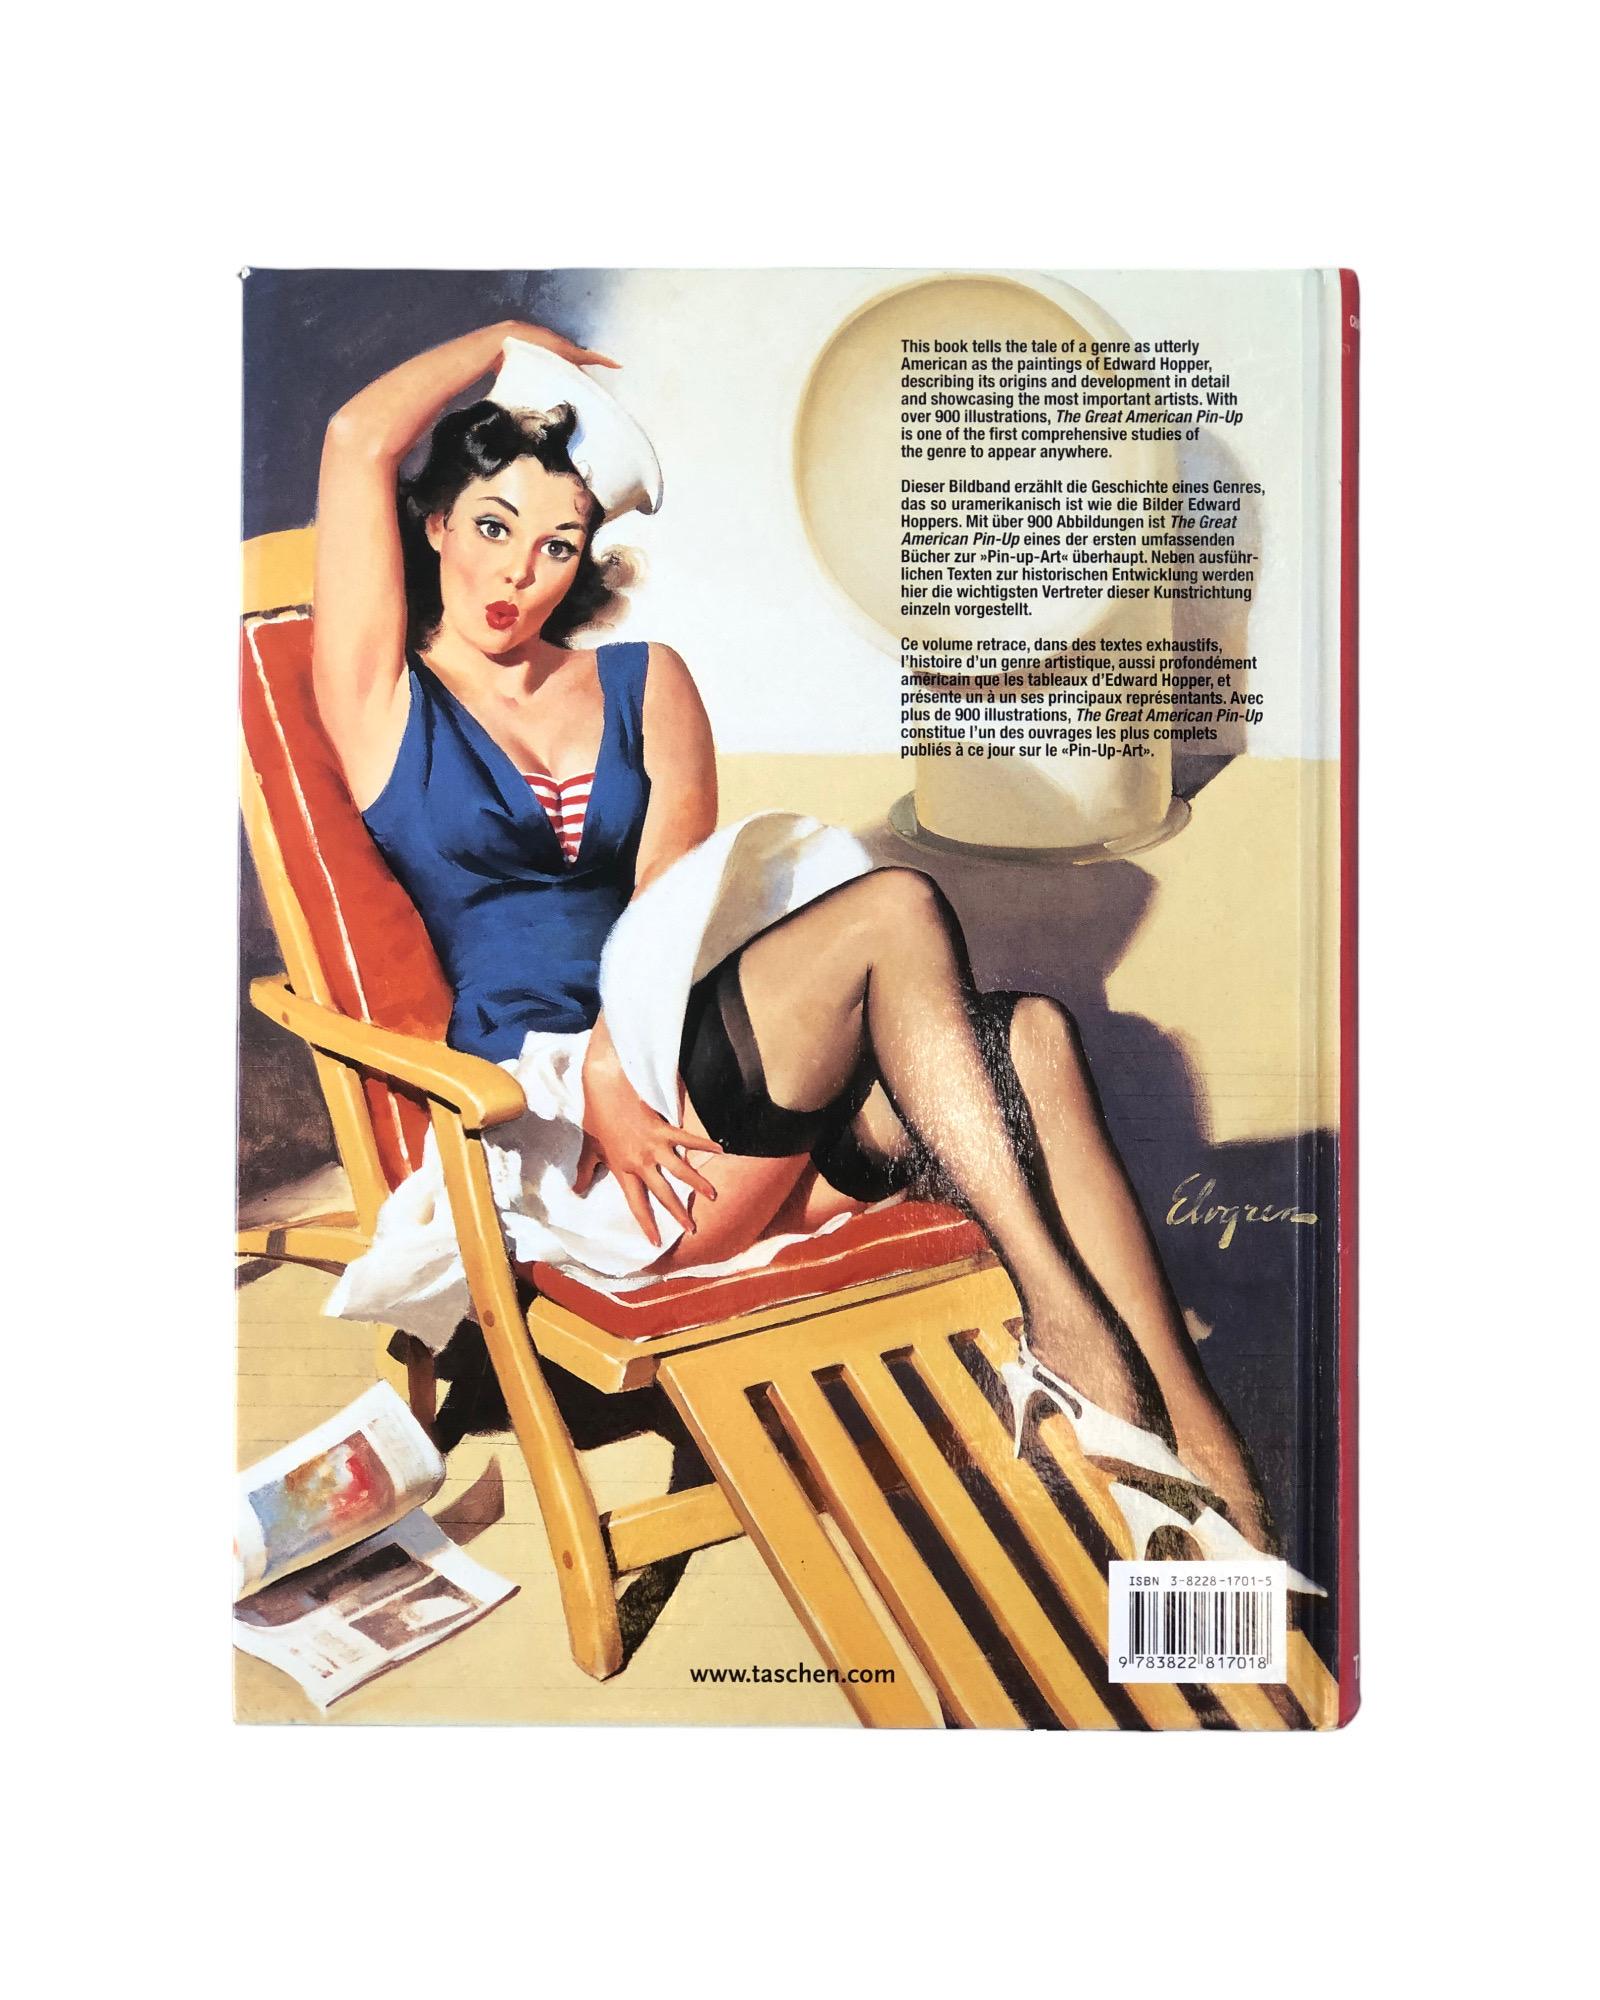 The Great American Pin-Up by Charles G. Martignette and Louis K. Meisel. Hardcover book, published in 2002 by Taschen. Printed in Italy, illustrated, 447 pages. Printed in English, German and French.